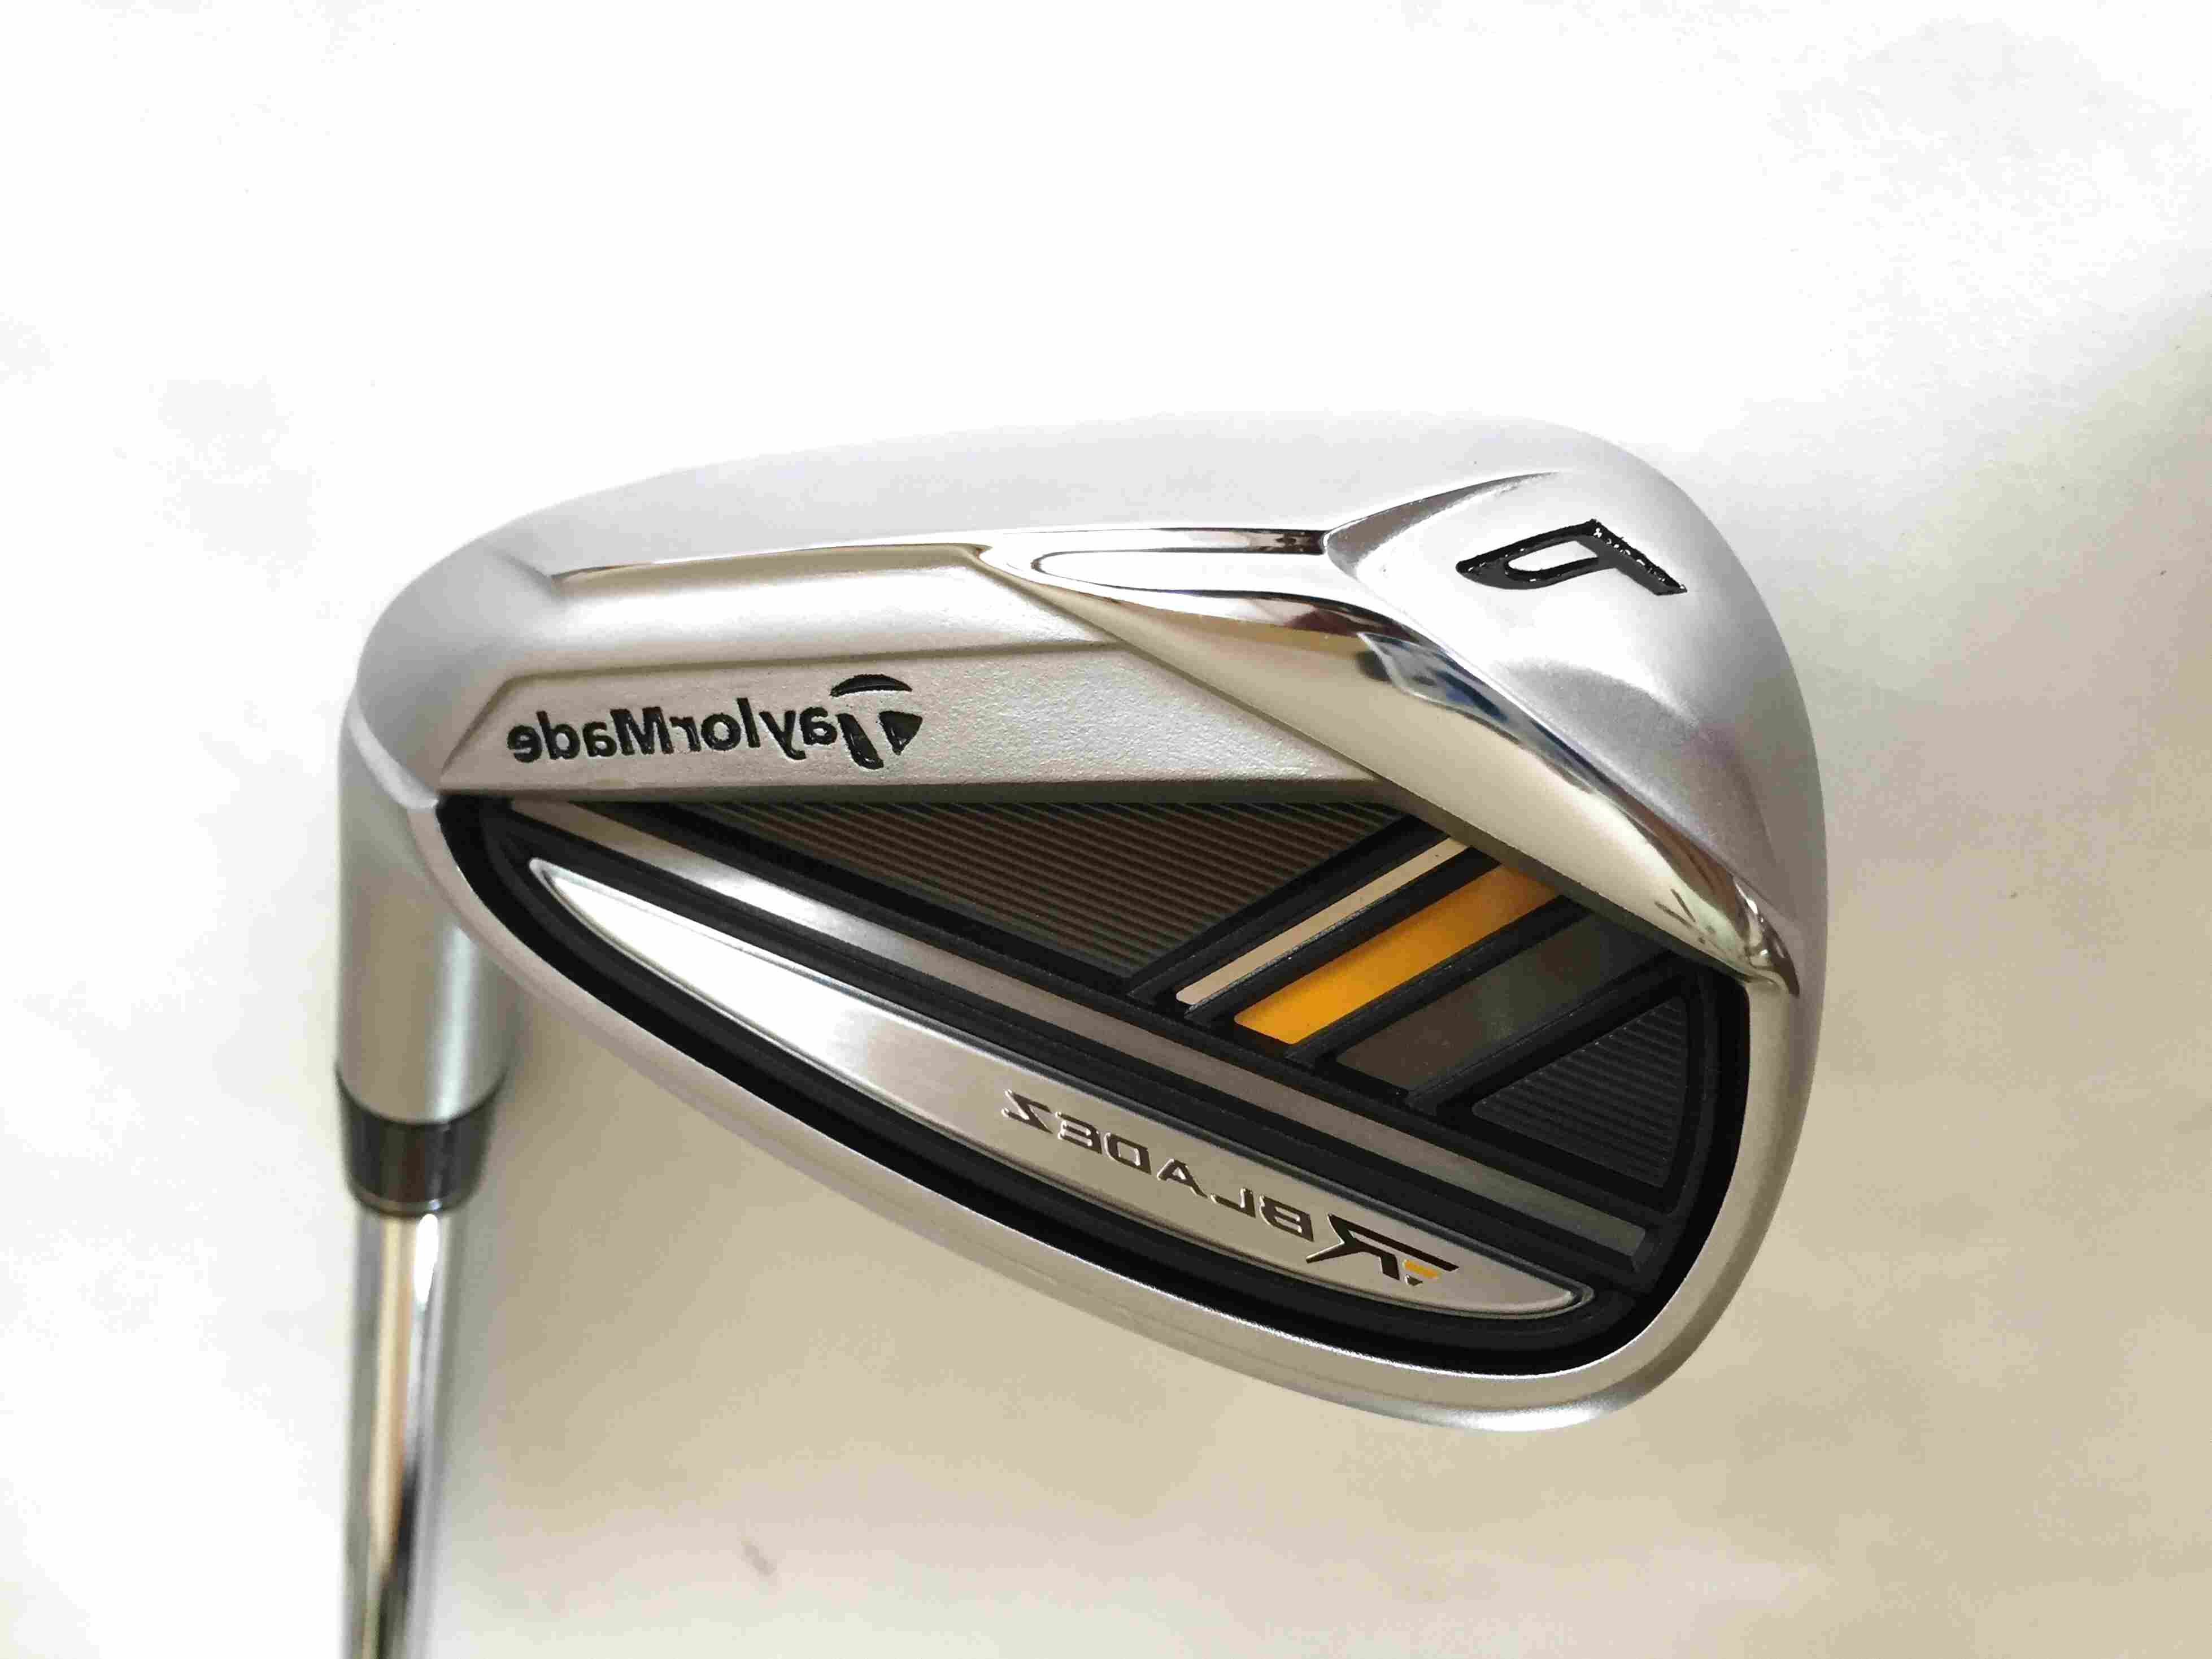 Taylormade Rocketbladez for sale in UK 57 used Taylormade Rocketbladezs